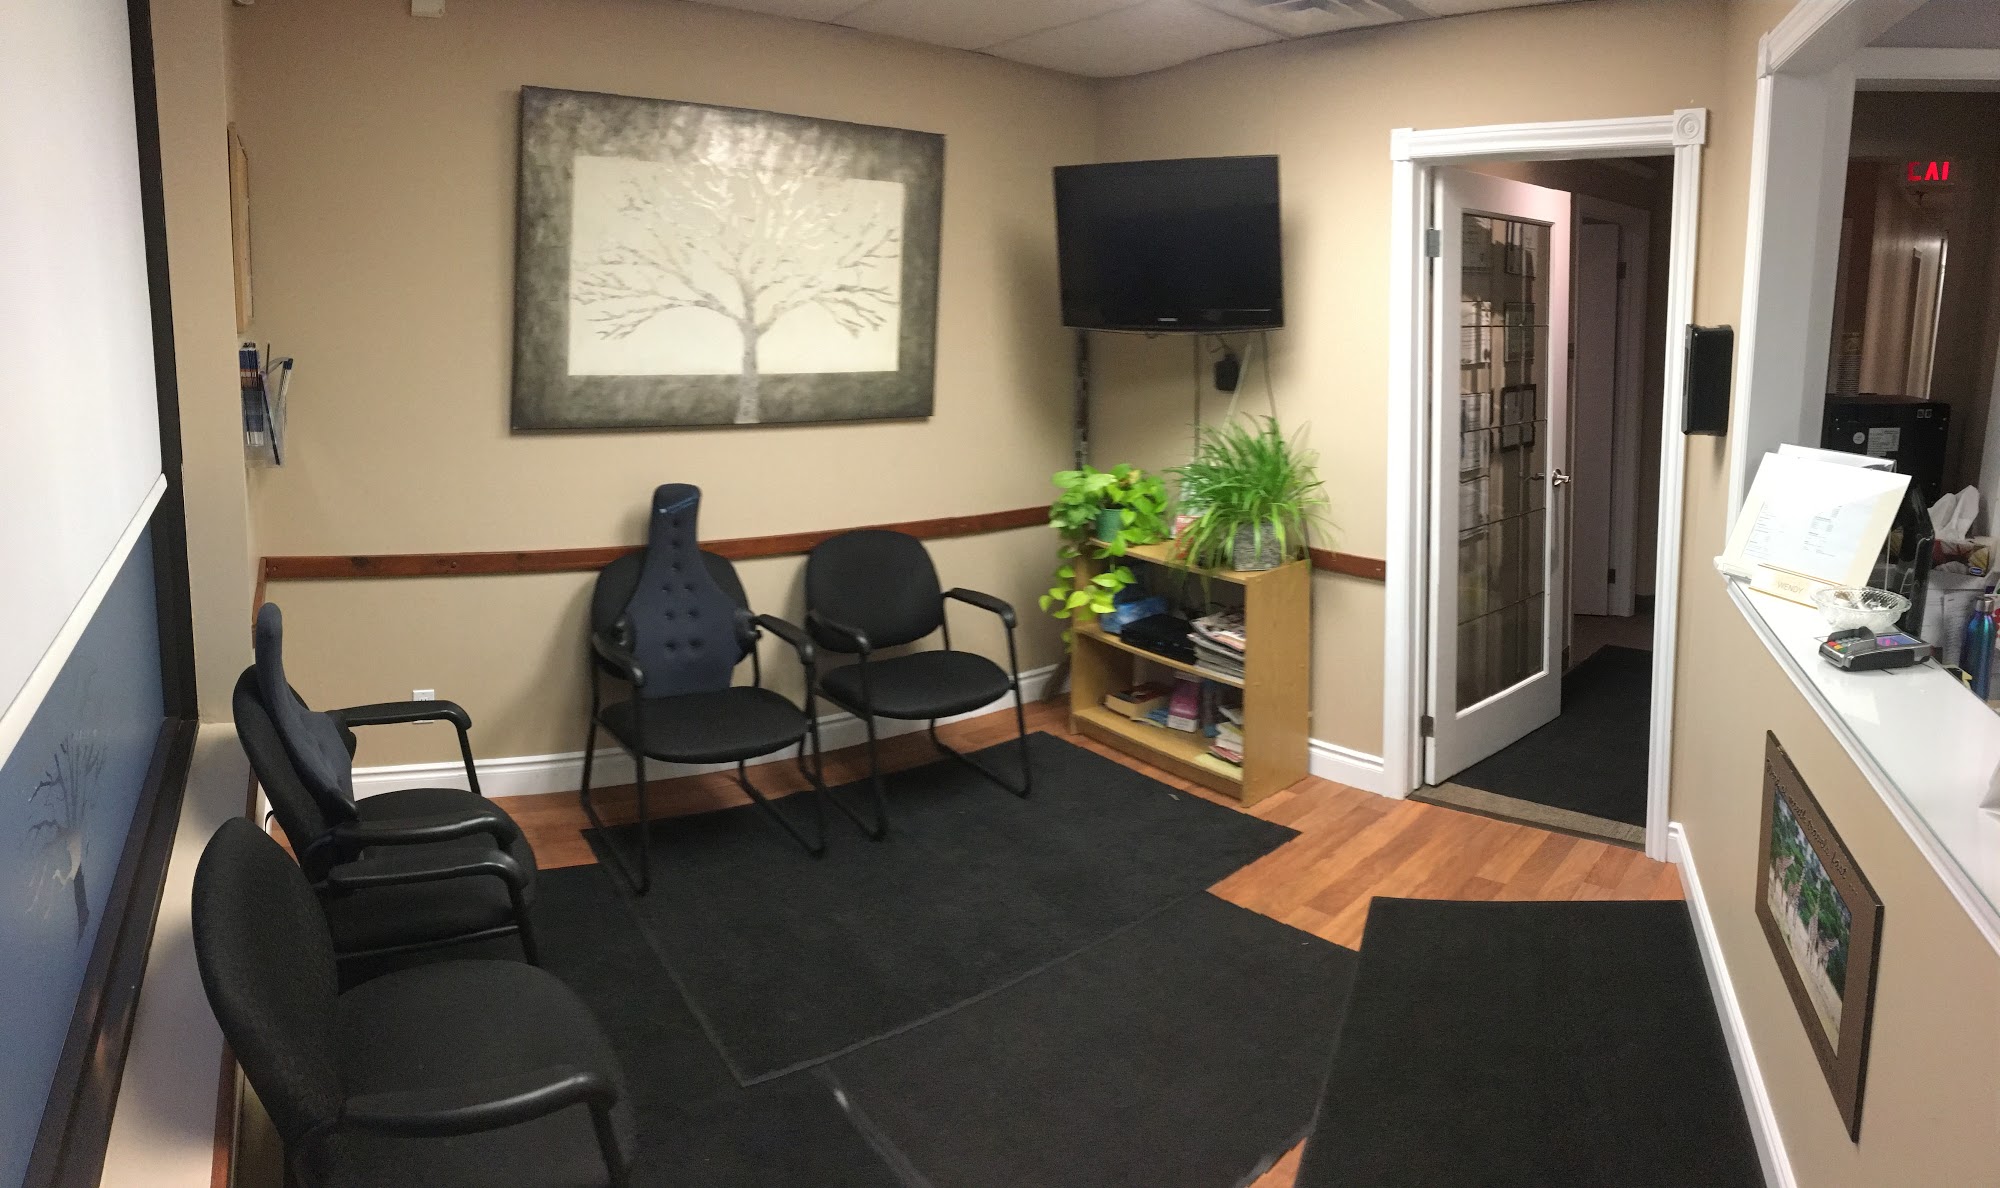 Harwood Chiropractic Centre